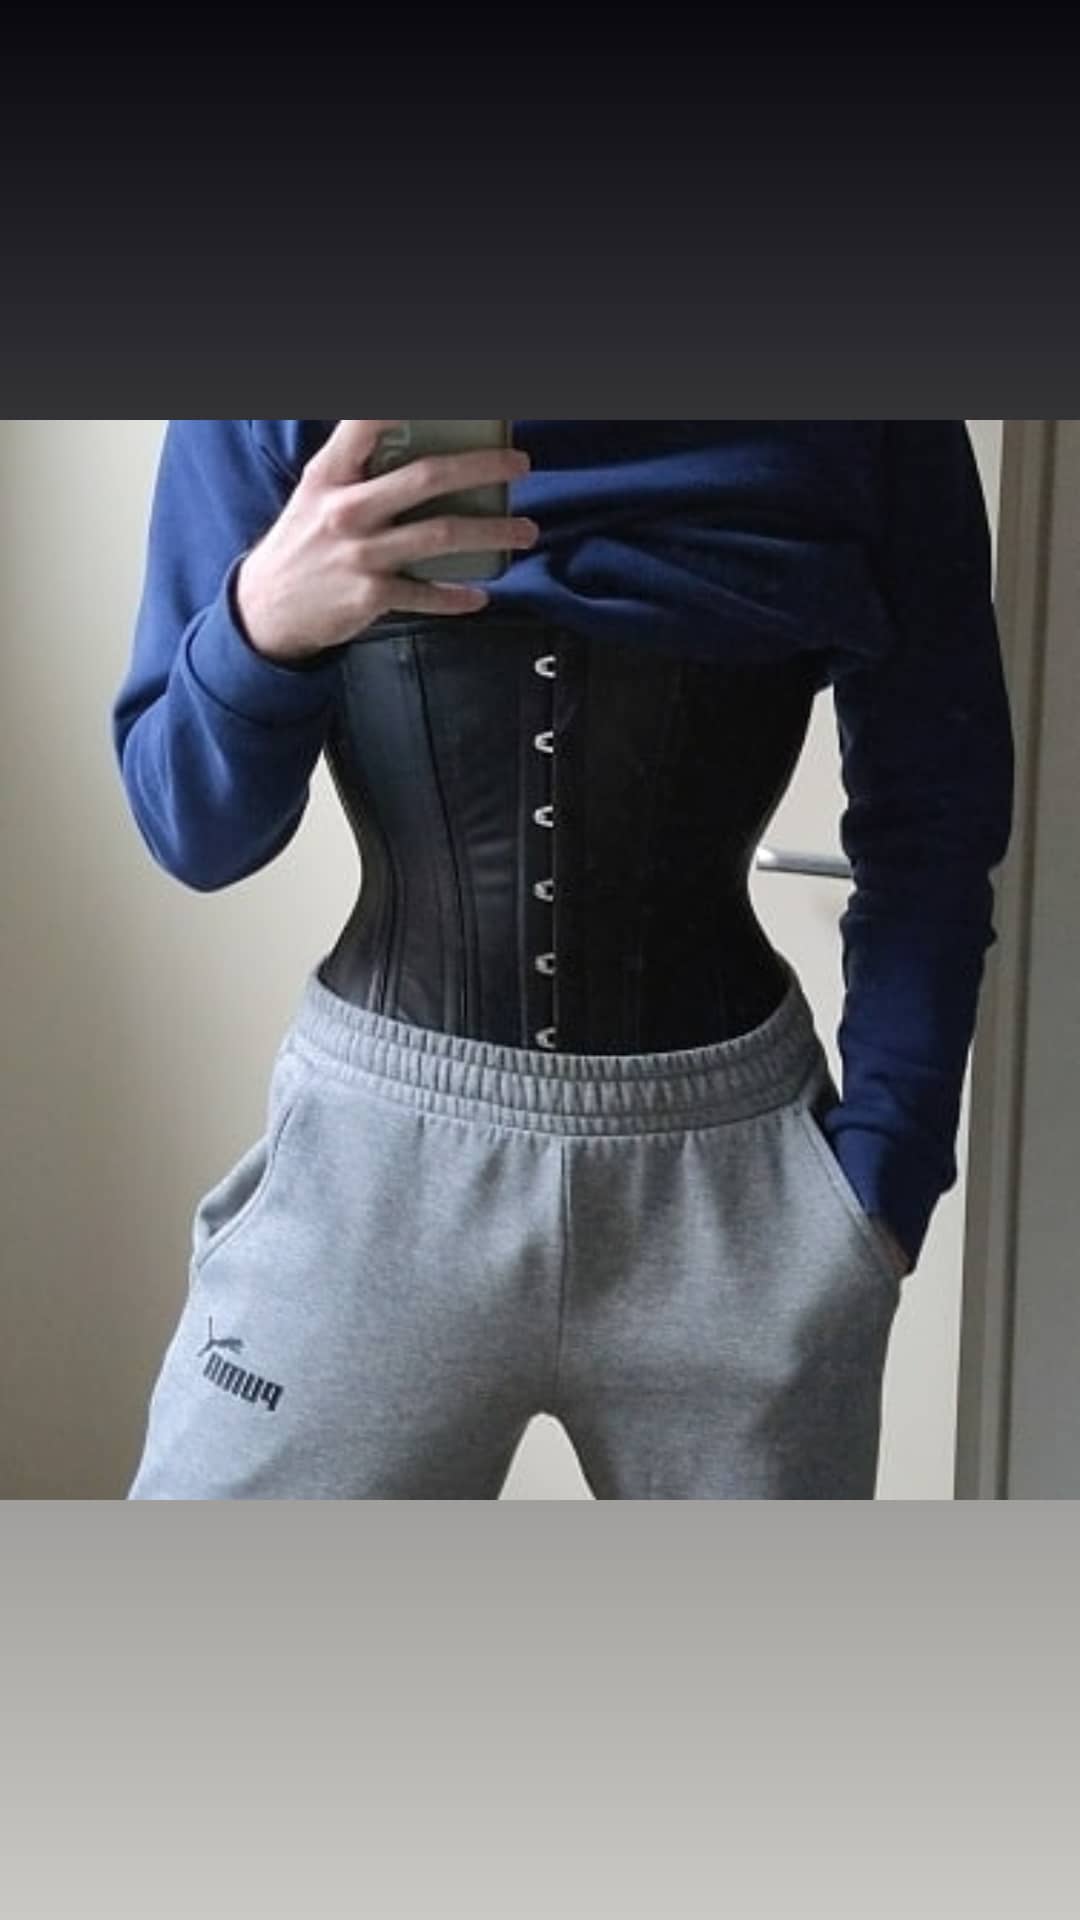 Annzley corset on X: Men wear corsets, which are very sexy. Men